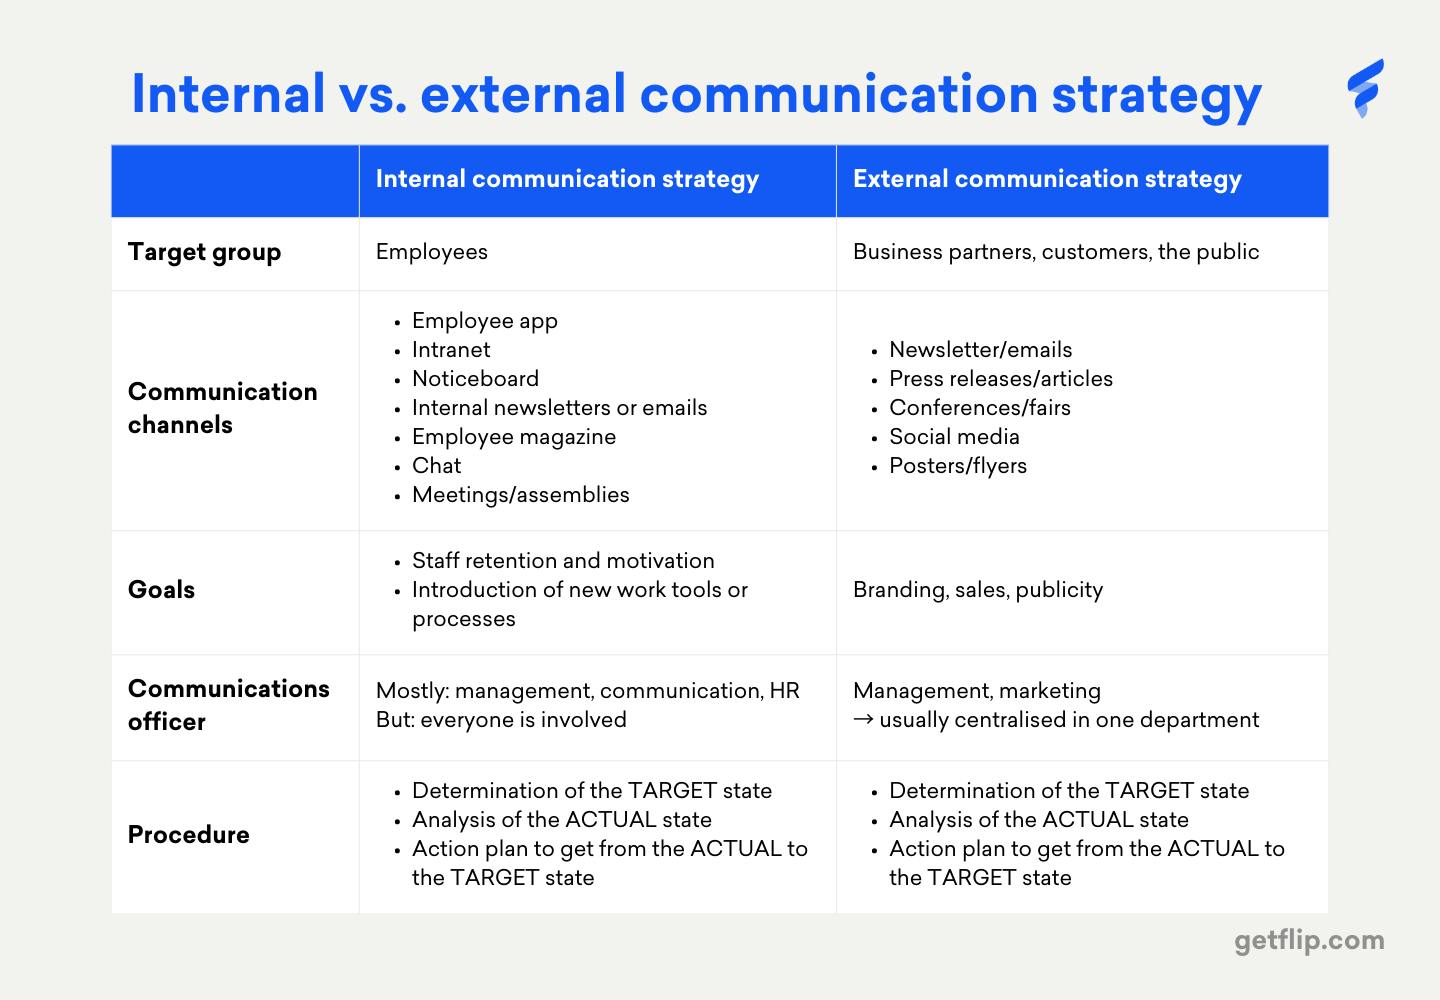 The differences between internal and external communication strategy at a glance.